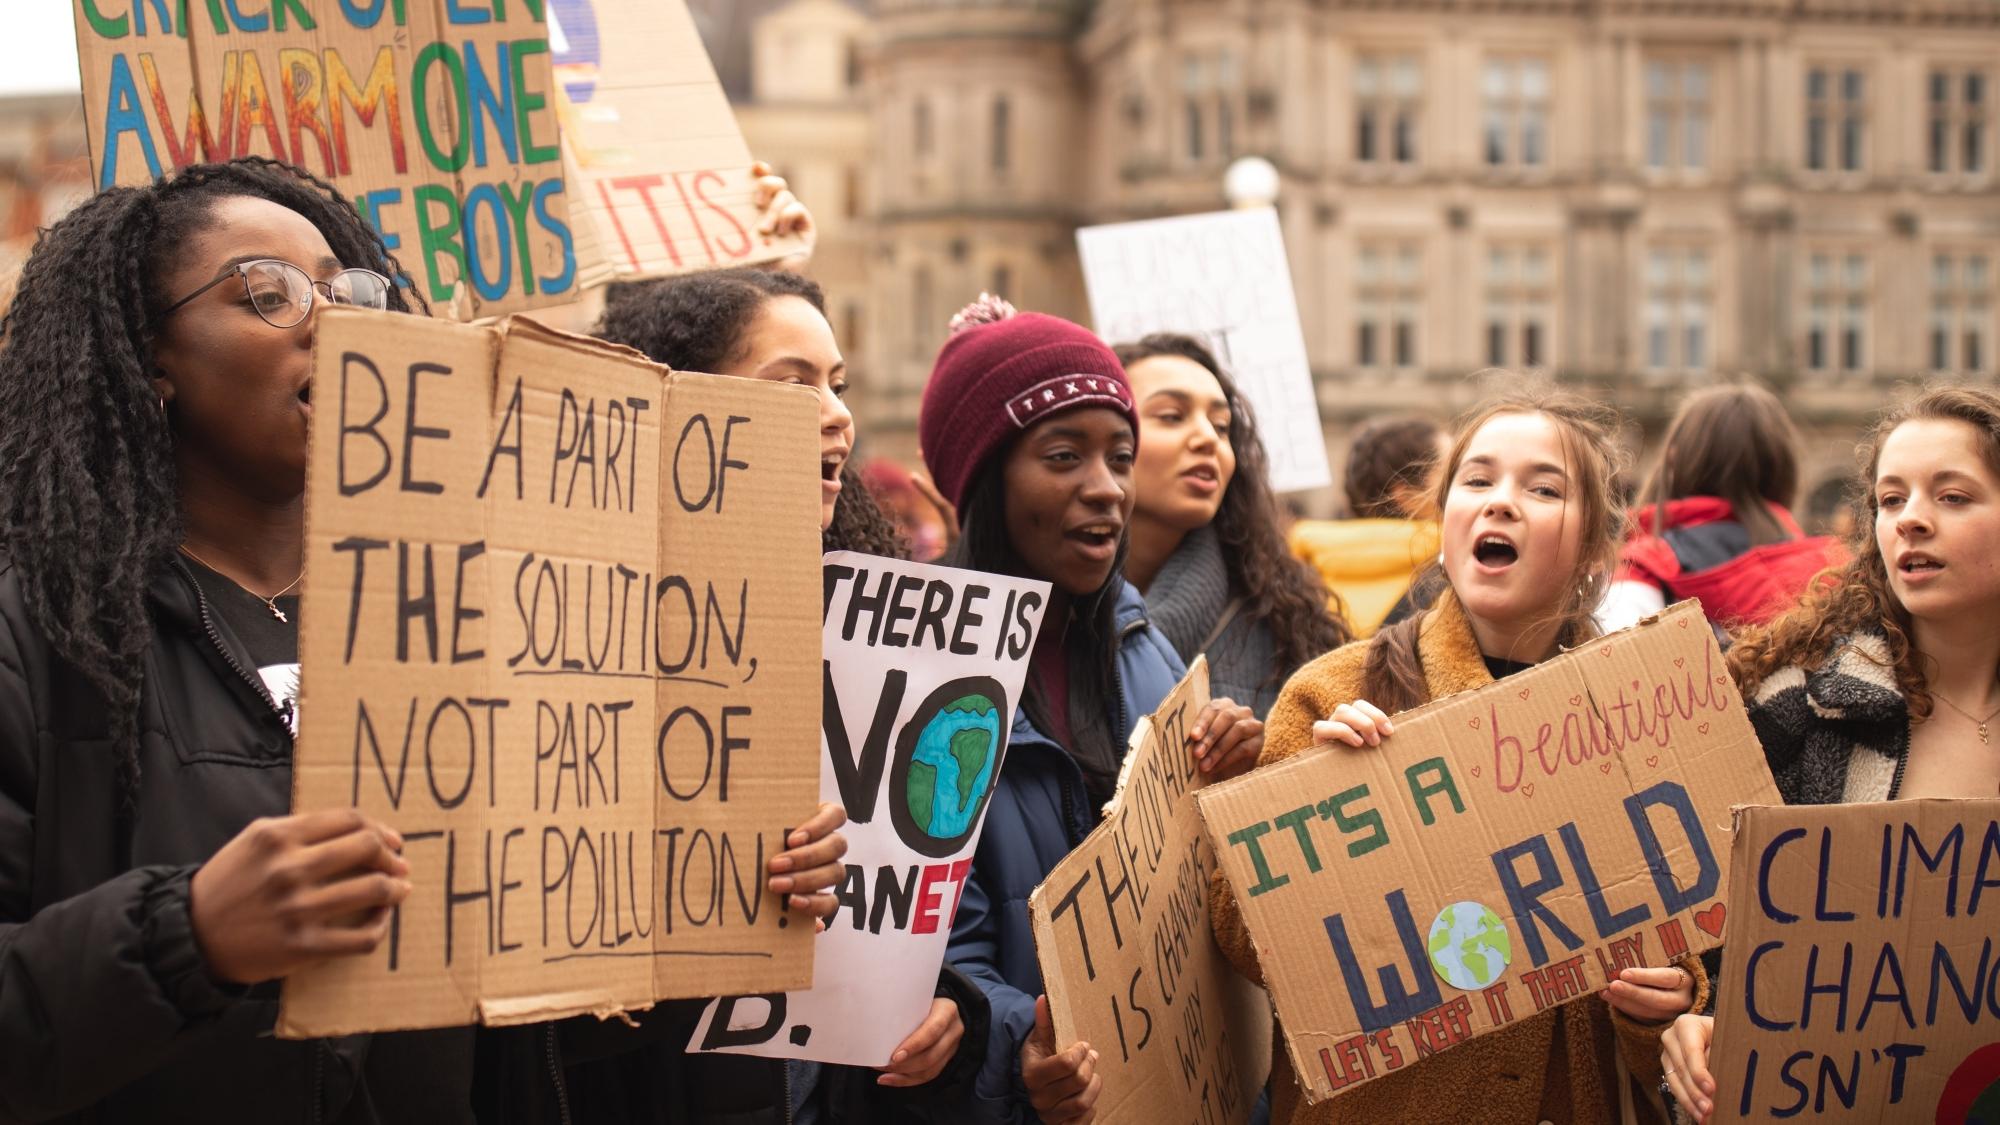 A group of young people at a protest holding placards about climate change